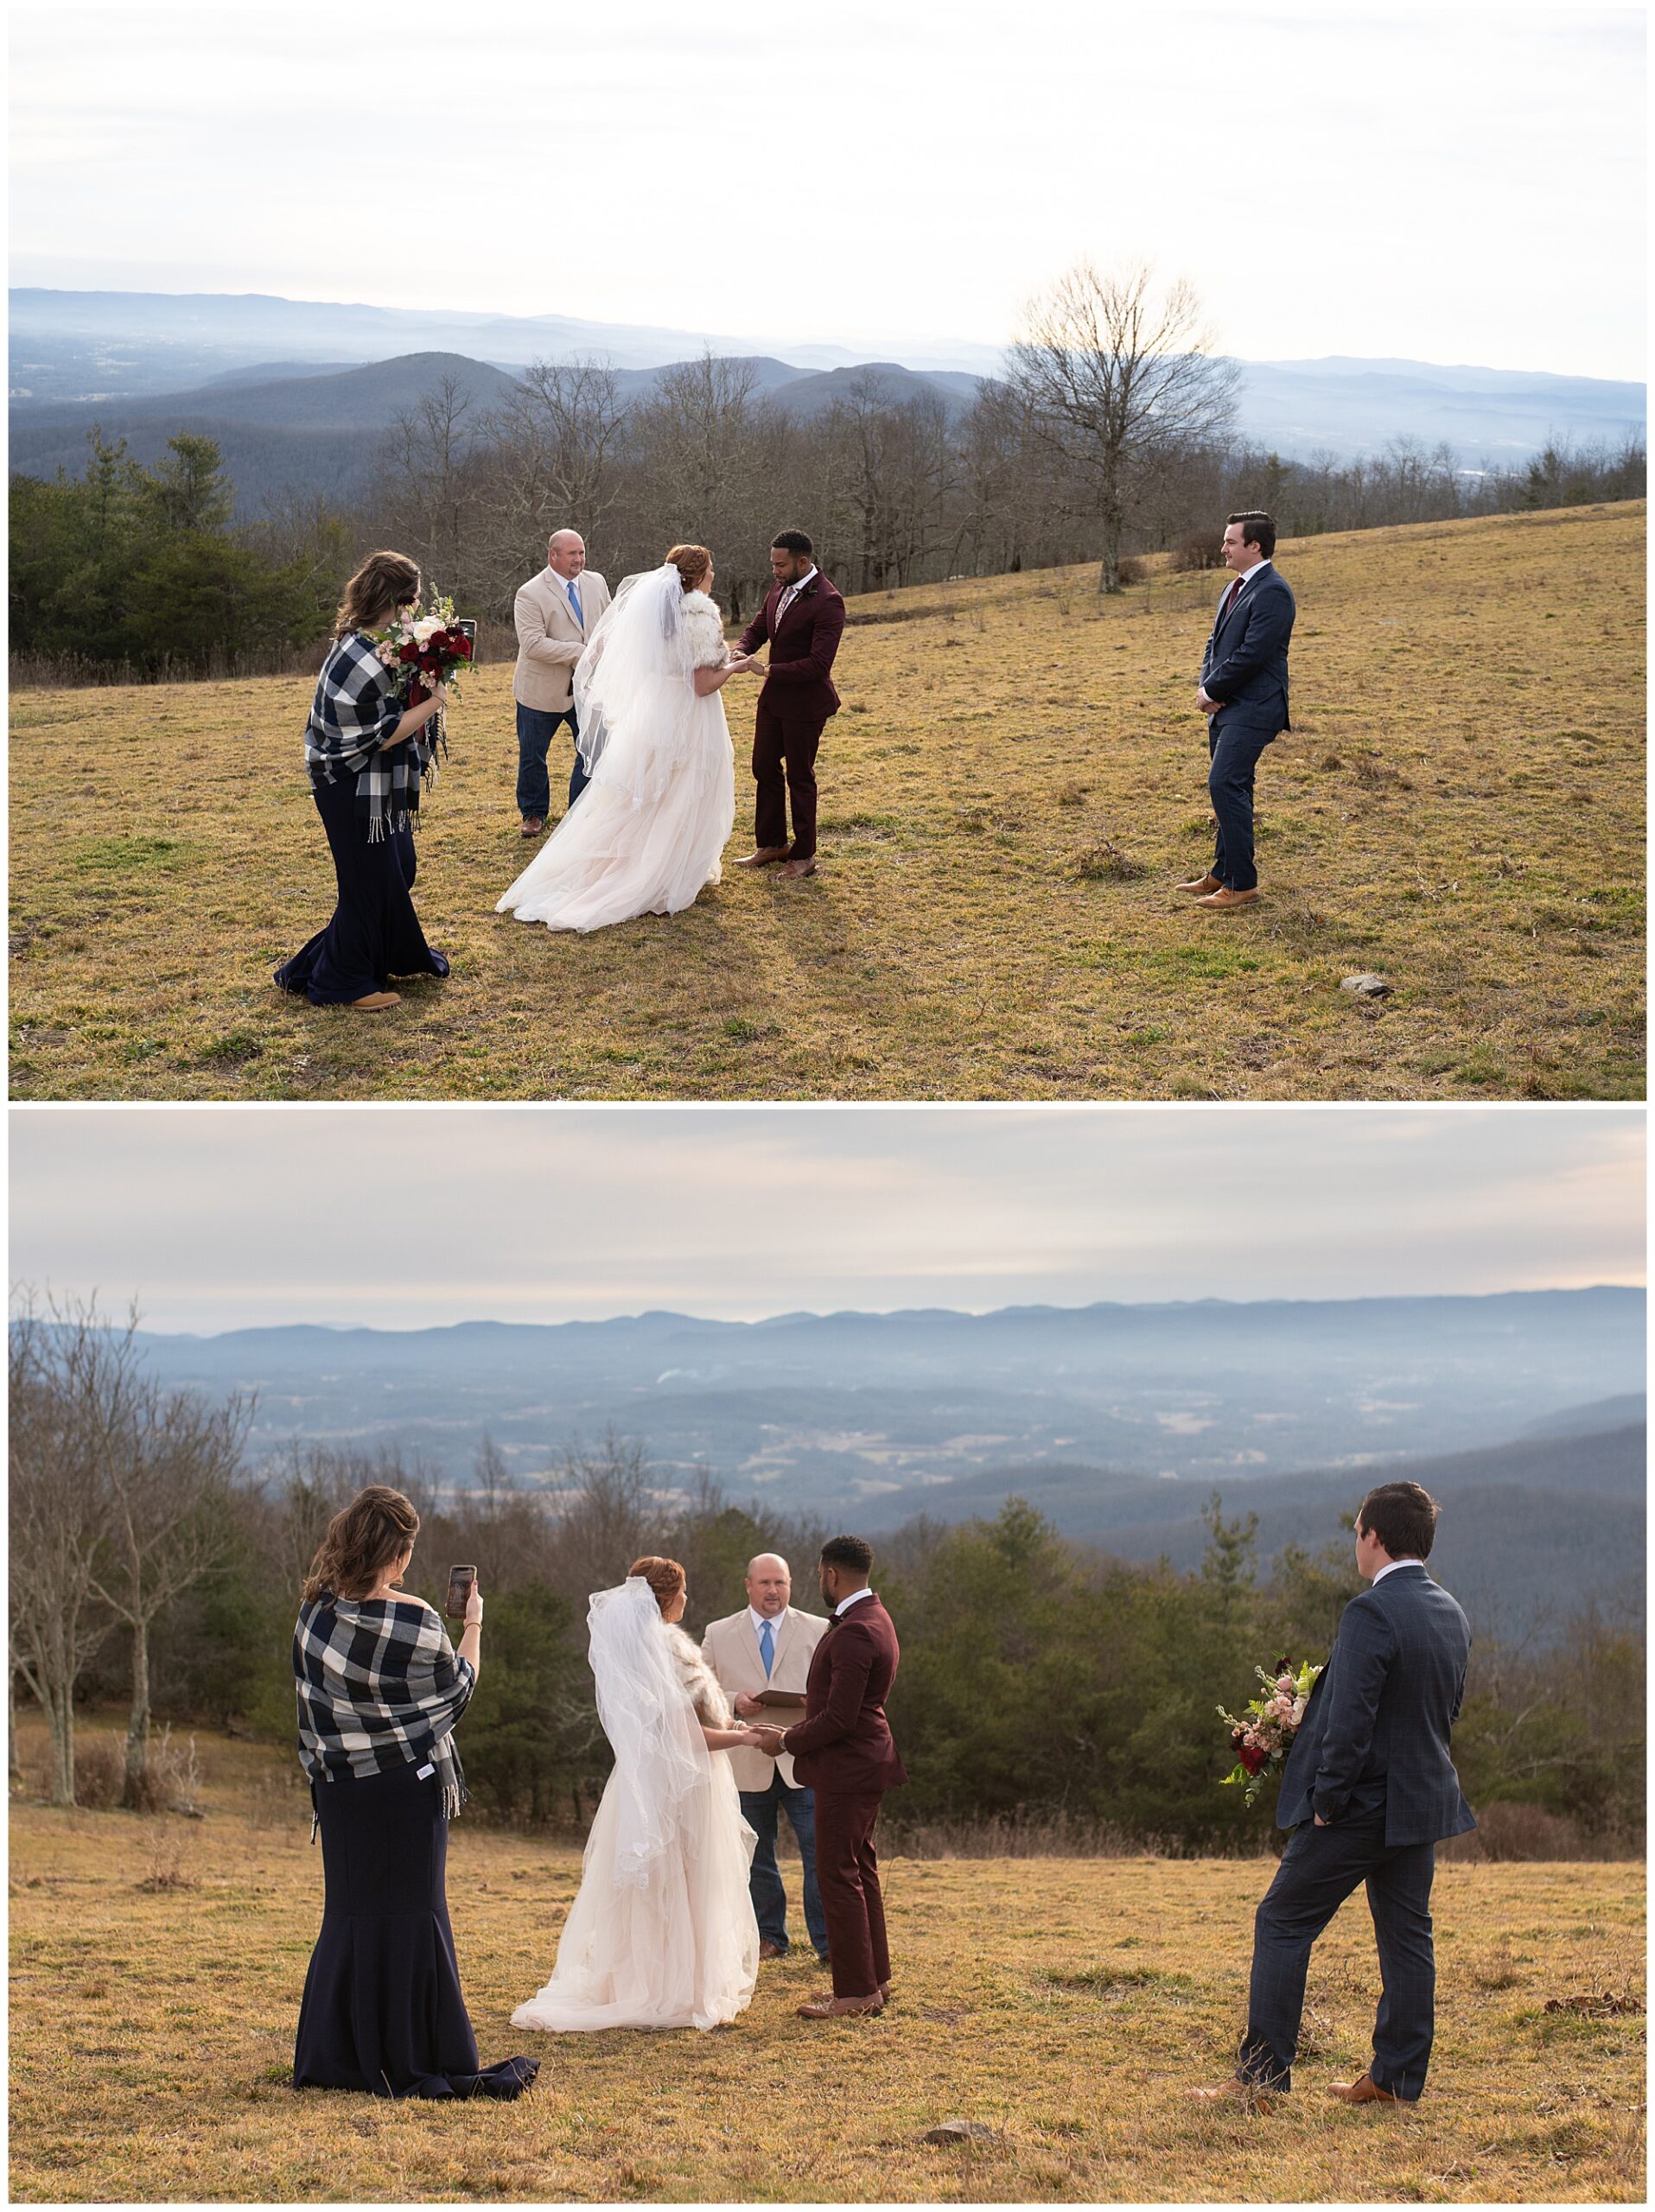 wideshot image of the ceremony with their two witnesses and a view of the mountains